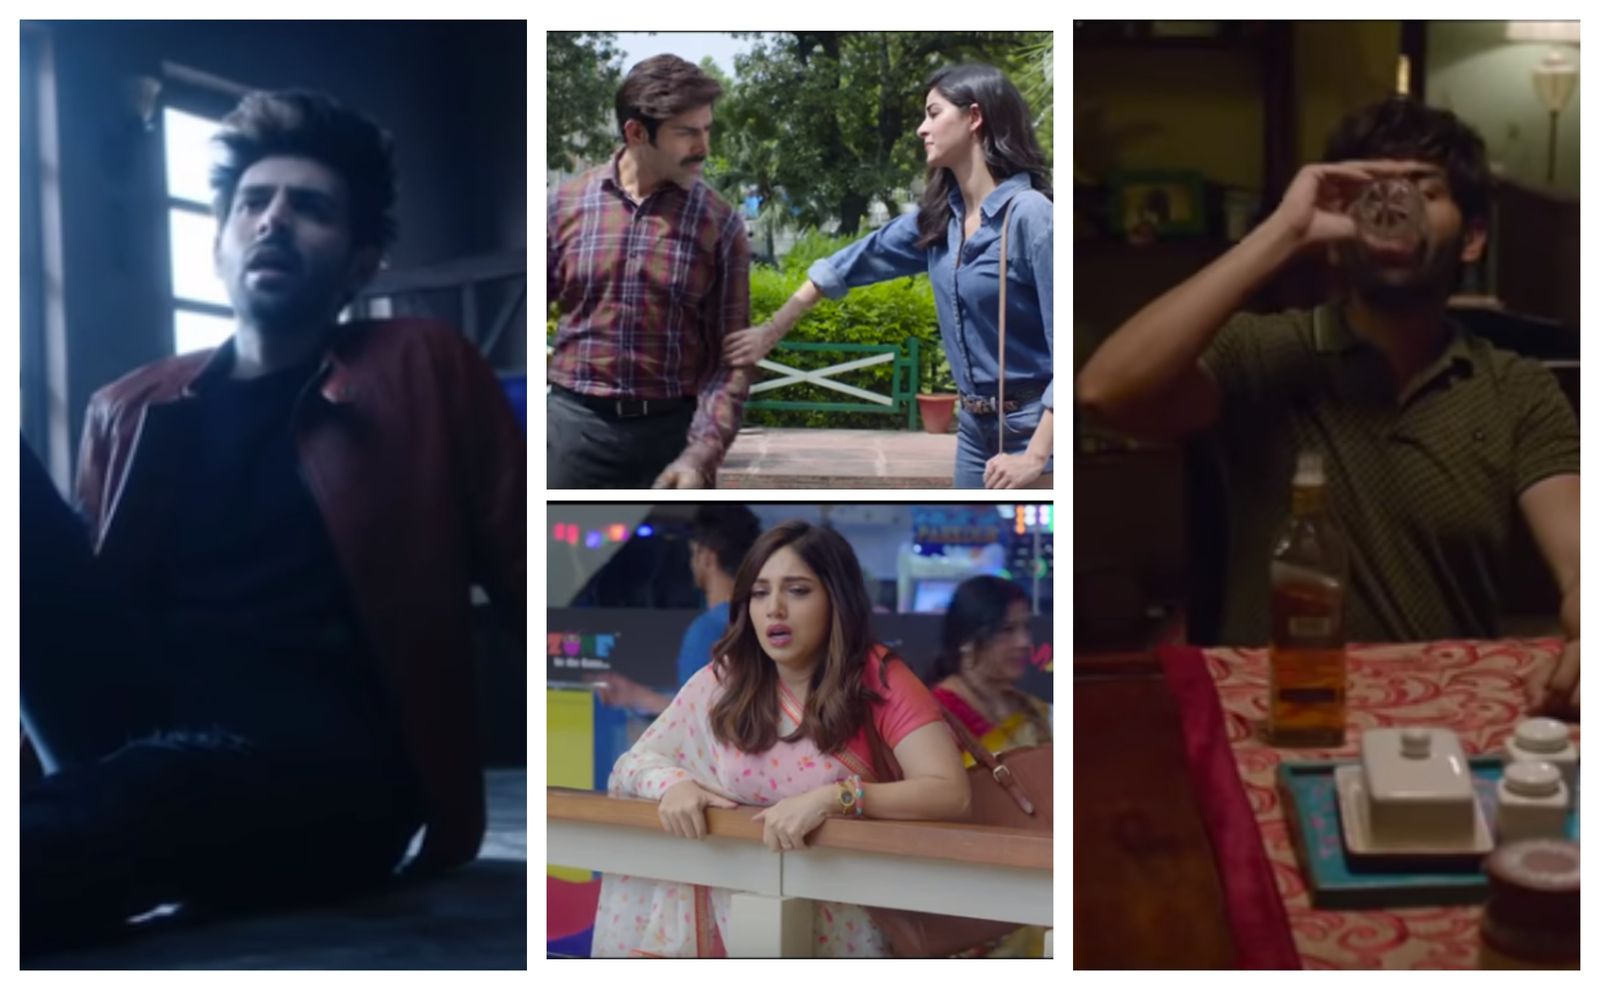 Dildara From Pati Patni Aur Woh Manages To Strike A Chord, Could Be The New Breakup Anthem